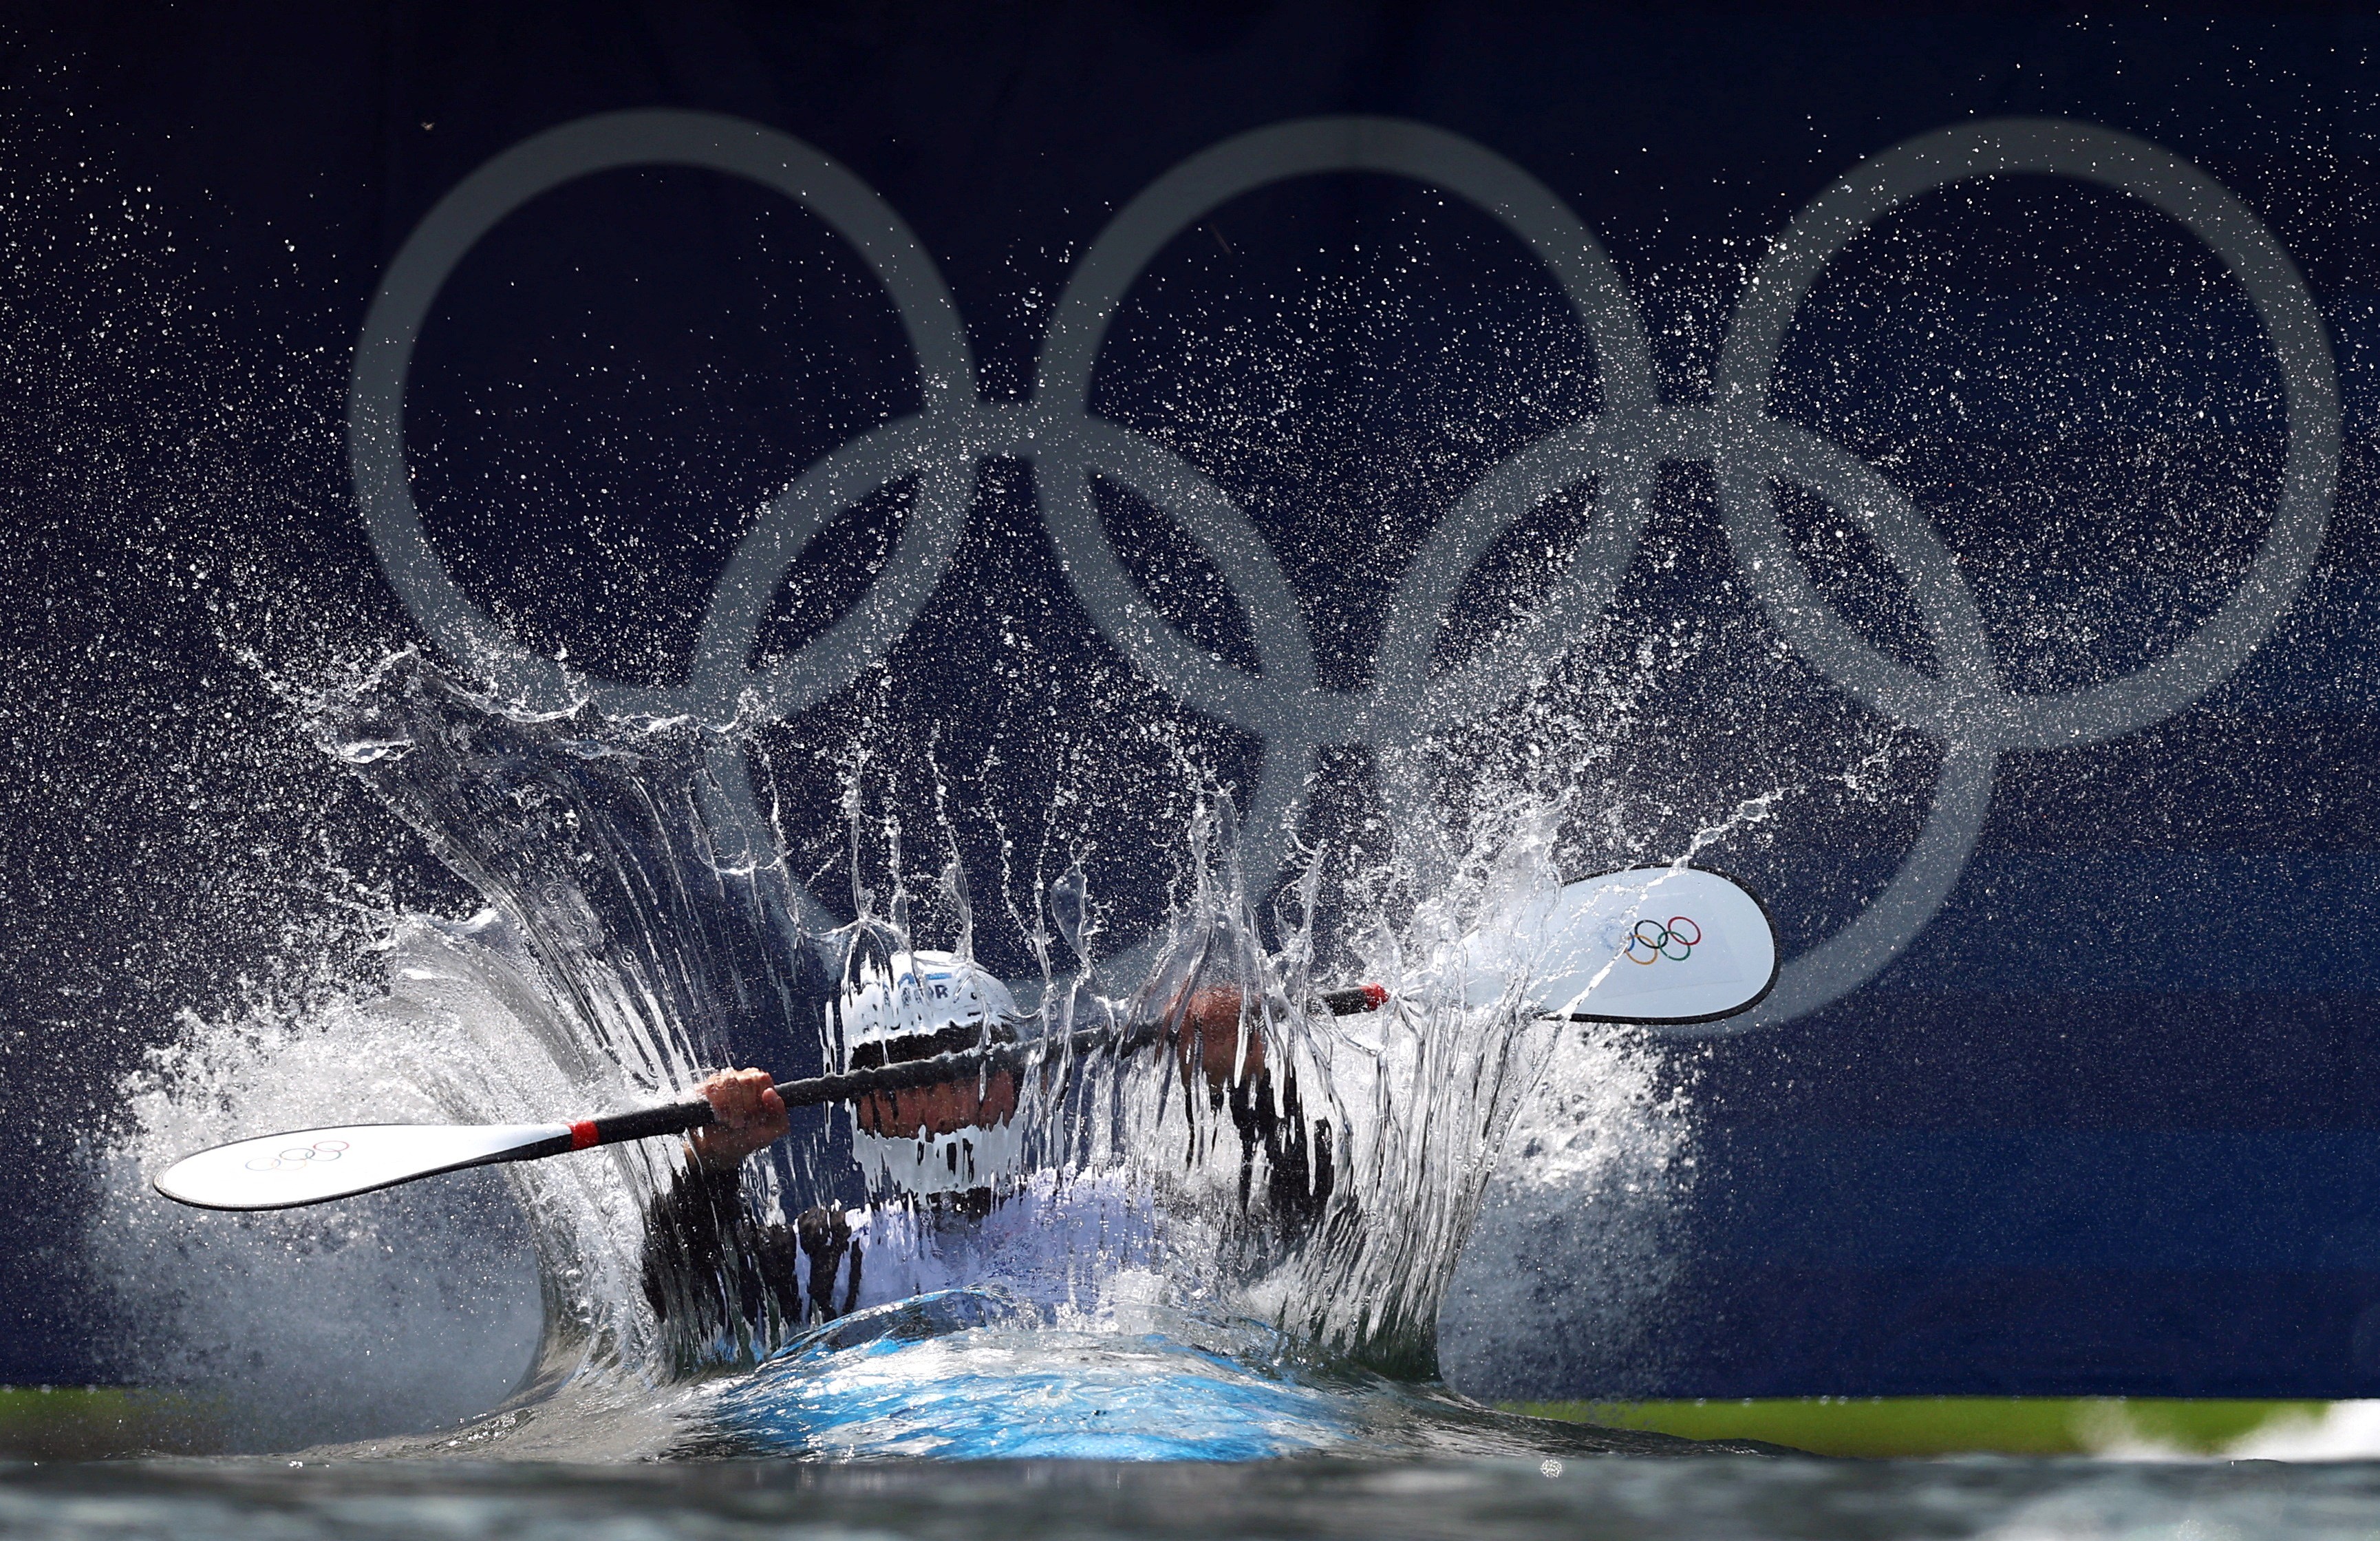 An athlete in a kayak makes a big splash as they drop into a course for a time trial run.